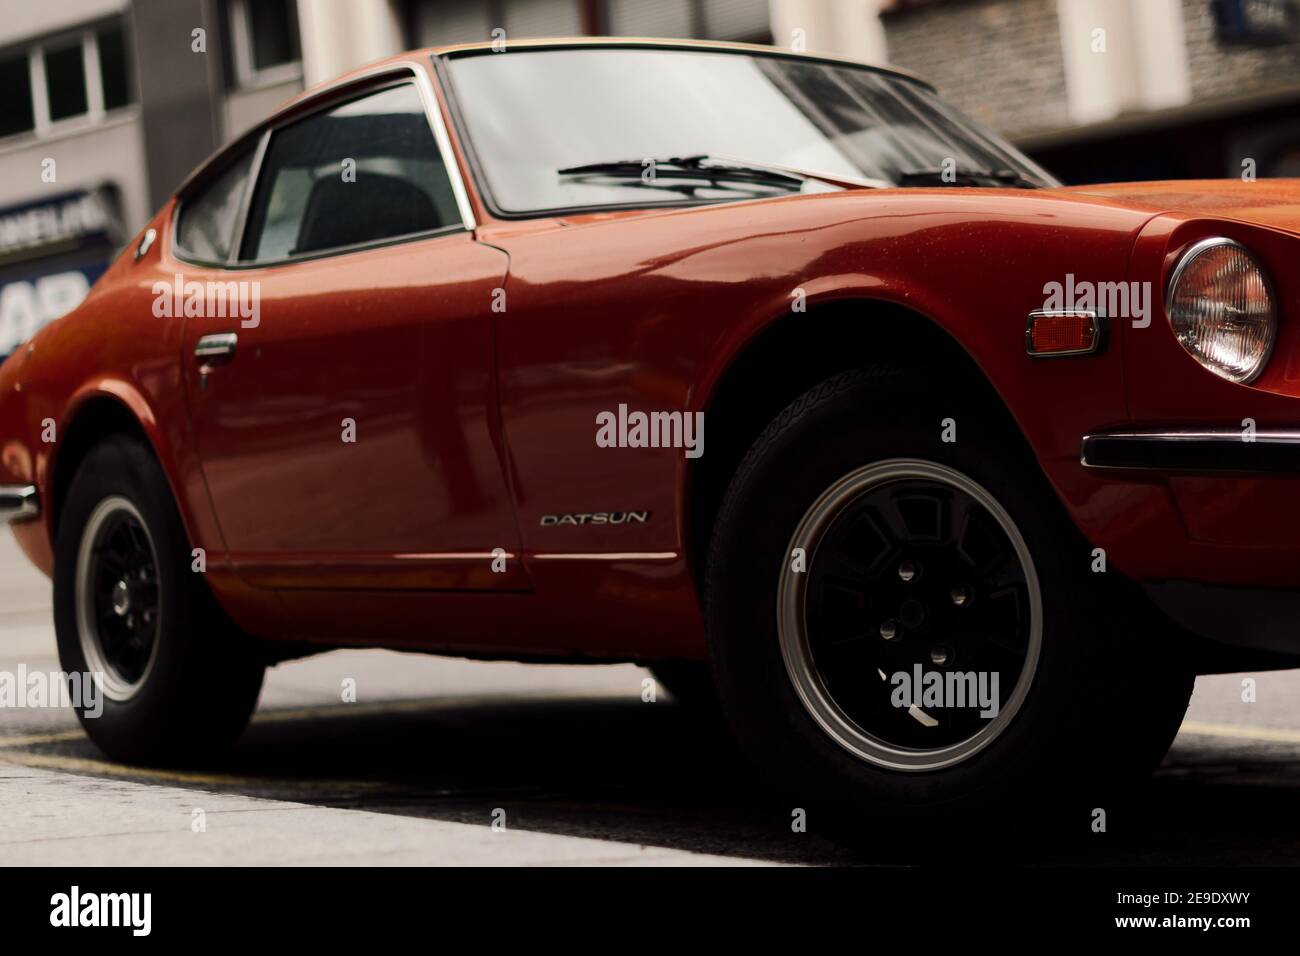 ANDORRA, ANDORRA - Aug 08, 2015: Selective Focus - View of the classic car Datsun 240Z by Nissan, parked in Andorra in a rainy dayClassic sports car o Stock Photo